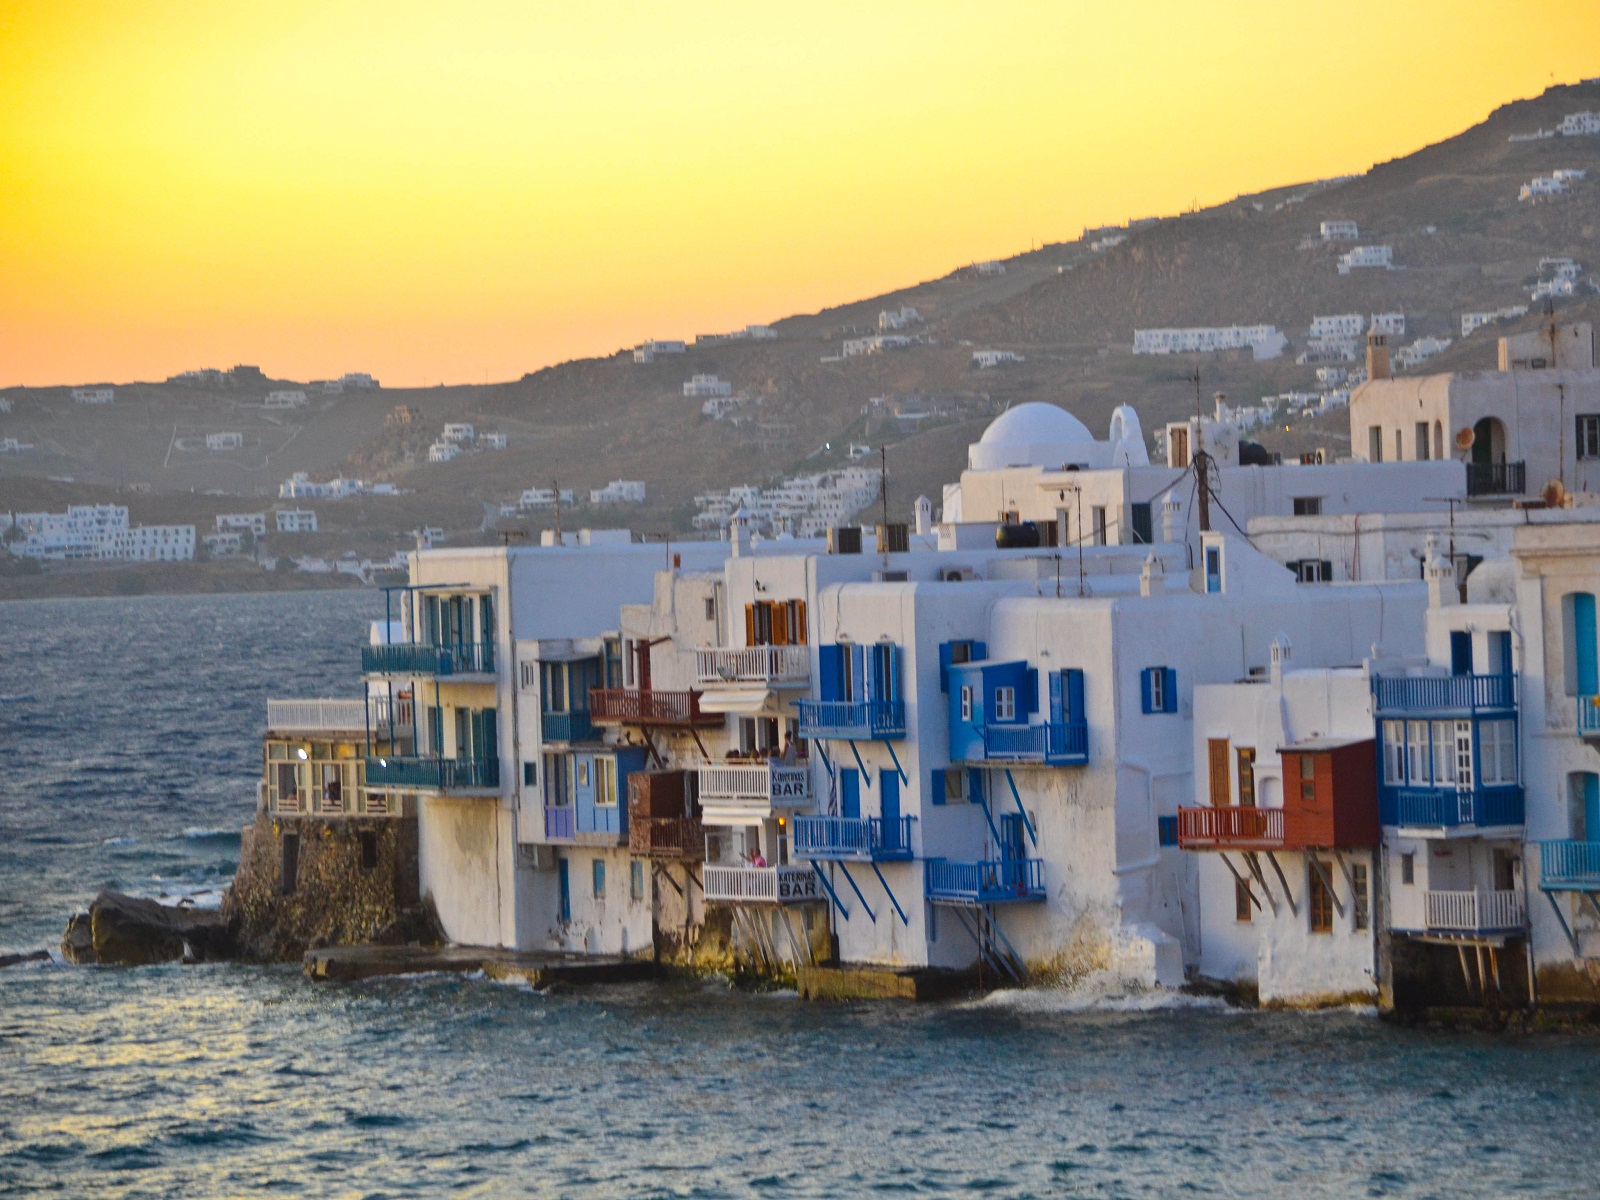 “In Greek mythology Mykonos was the location of the battle between Zeus and the Titans , and the island was named in honor of Apollo's grandson Mykons.